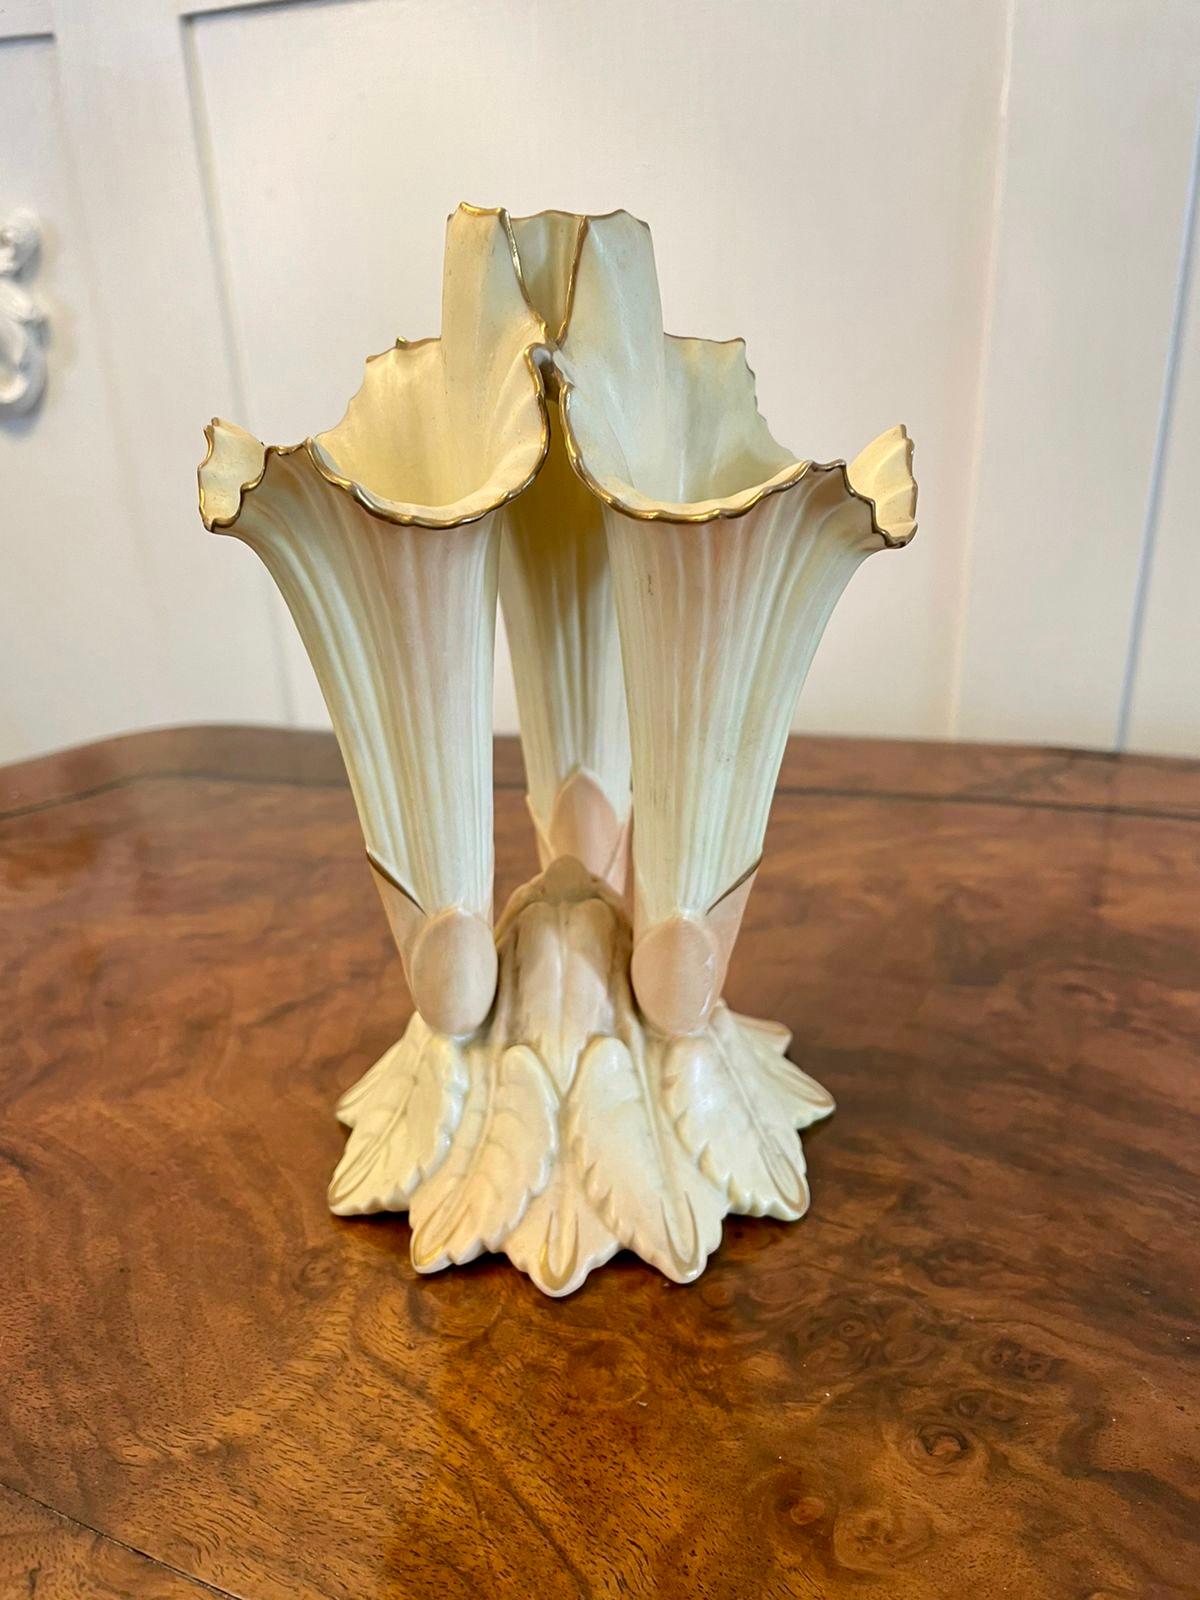 Antique pair of Locke & Co. porcelain blush ivory spill vases in the form of three lily flowers. 

Exquisite design and colours in perfect condition.

The antique Locke & Co. porcelain blush ivory basket shown in the picture is also available